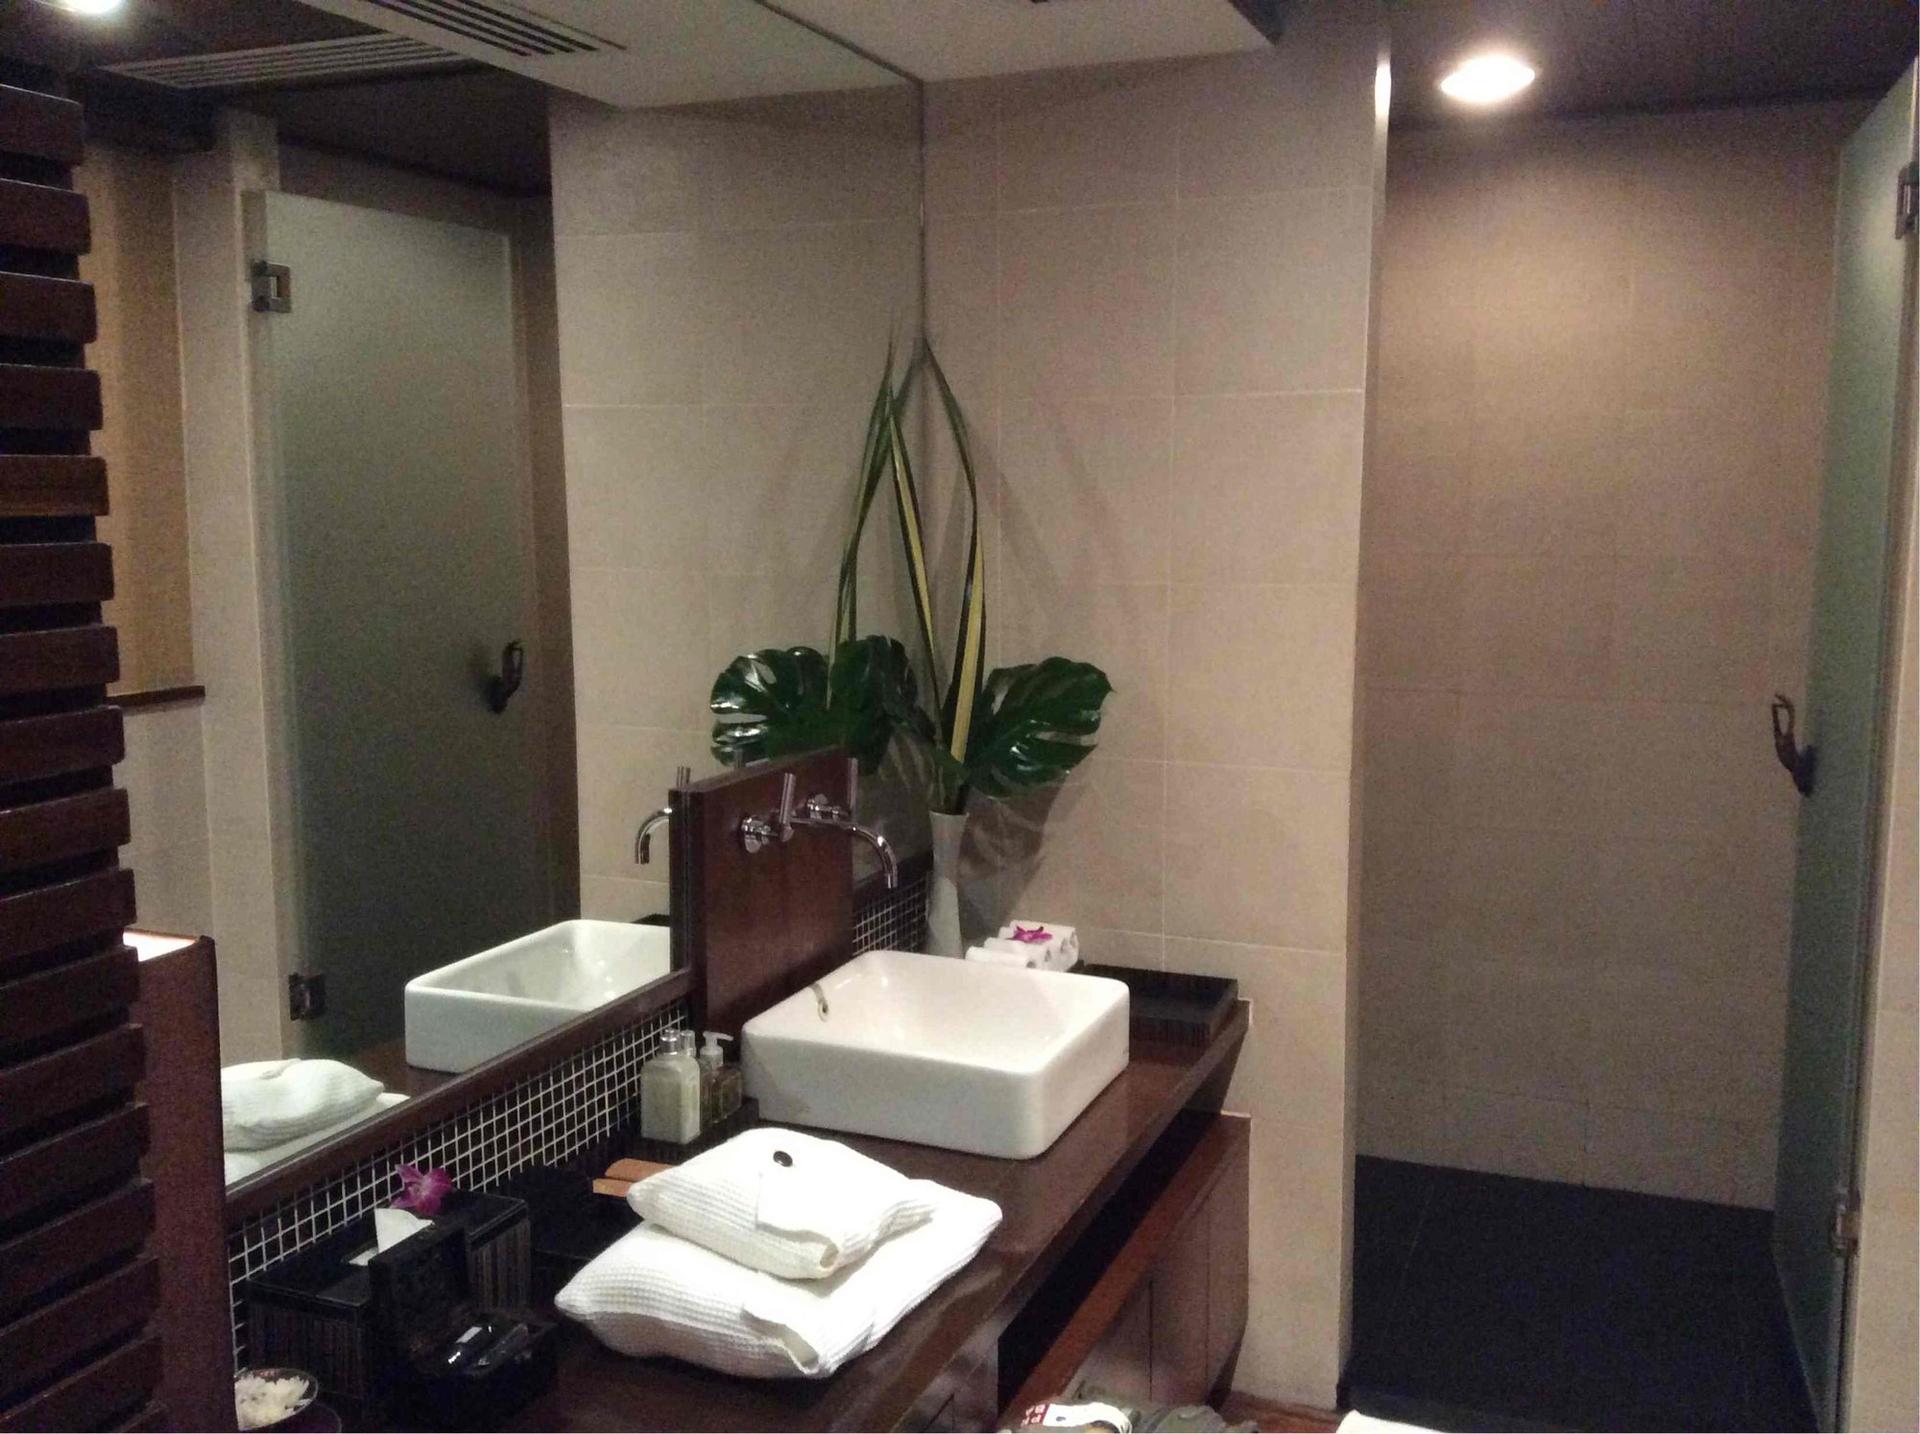 Thai Airways Royal Orchid Spa  image 11 of 25